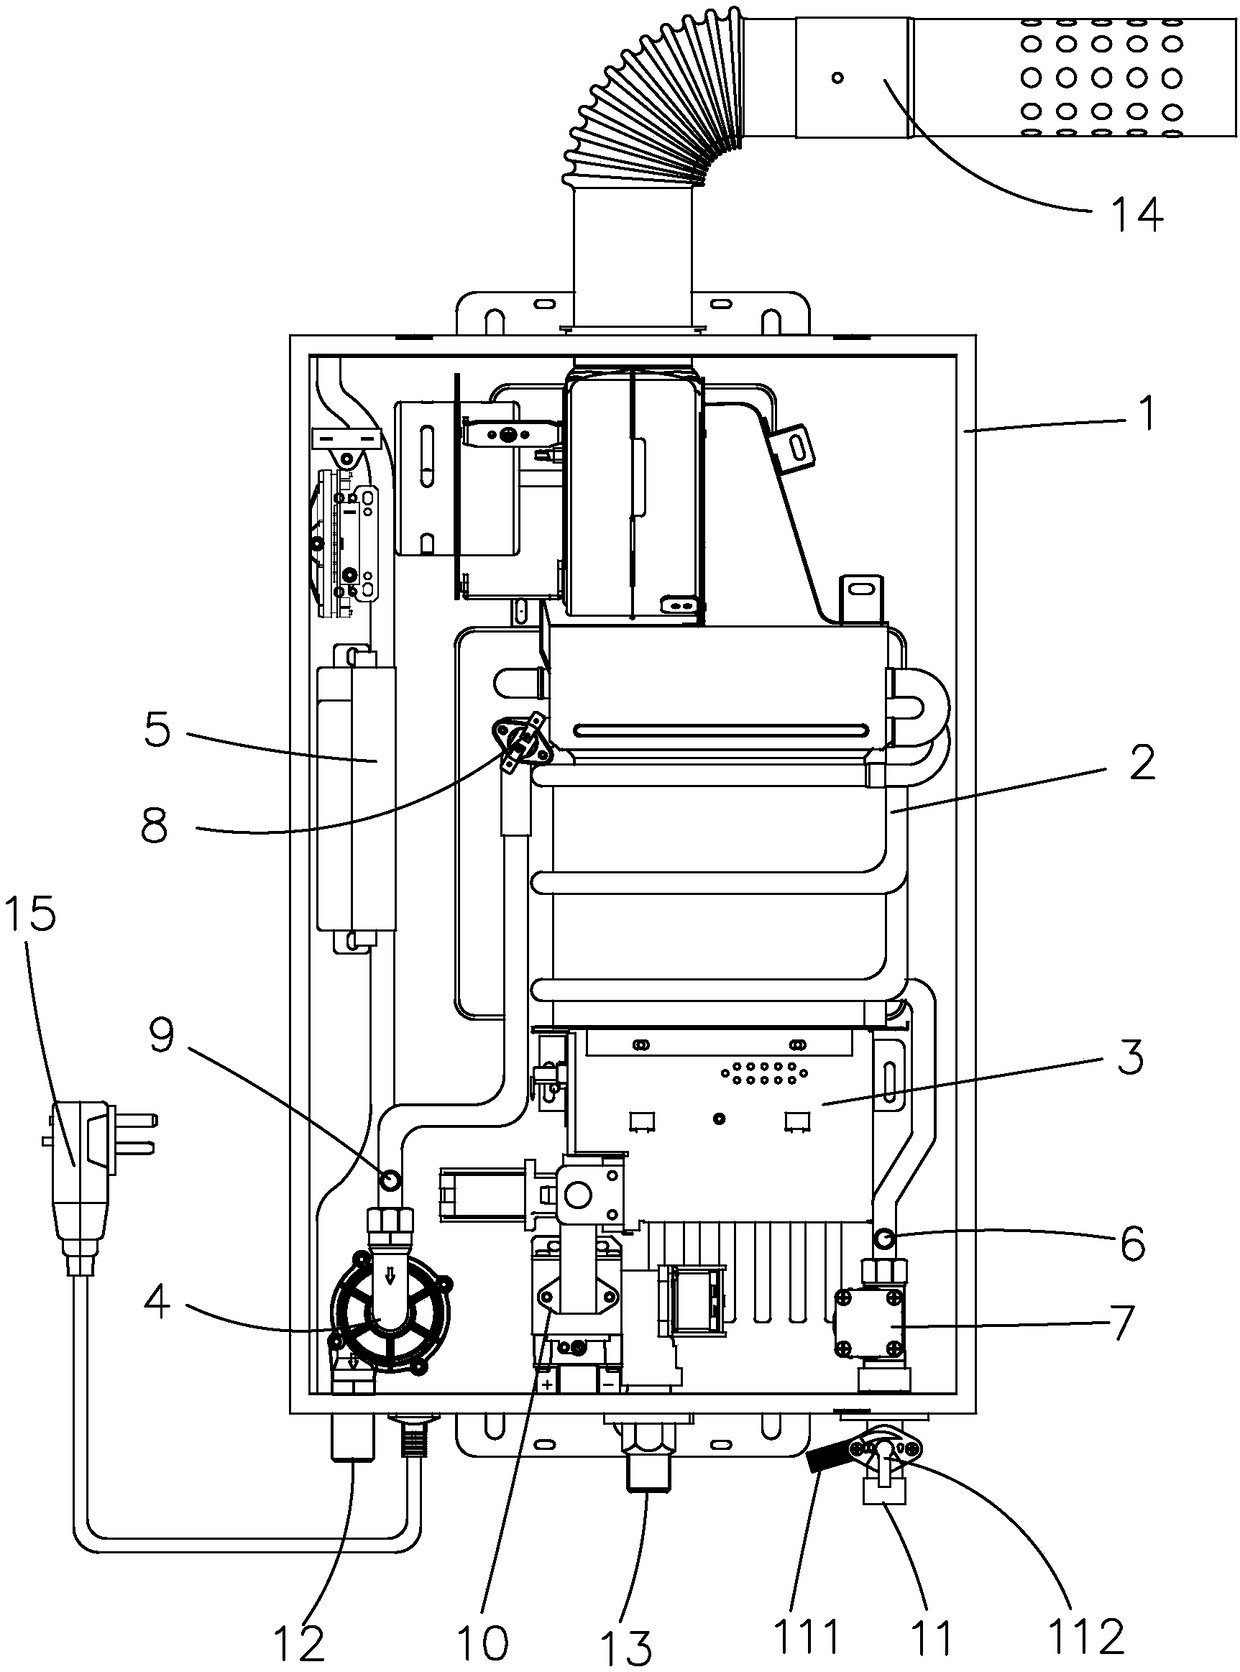 Water heater water supply system with rear circulating pump and control method